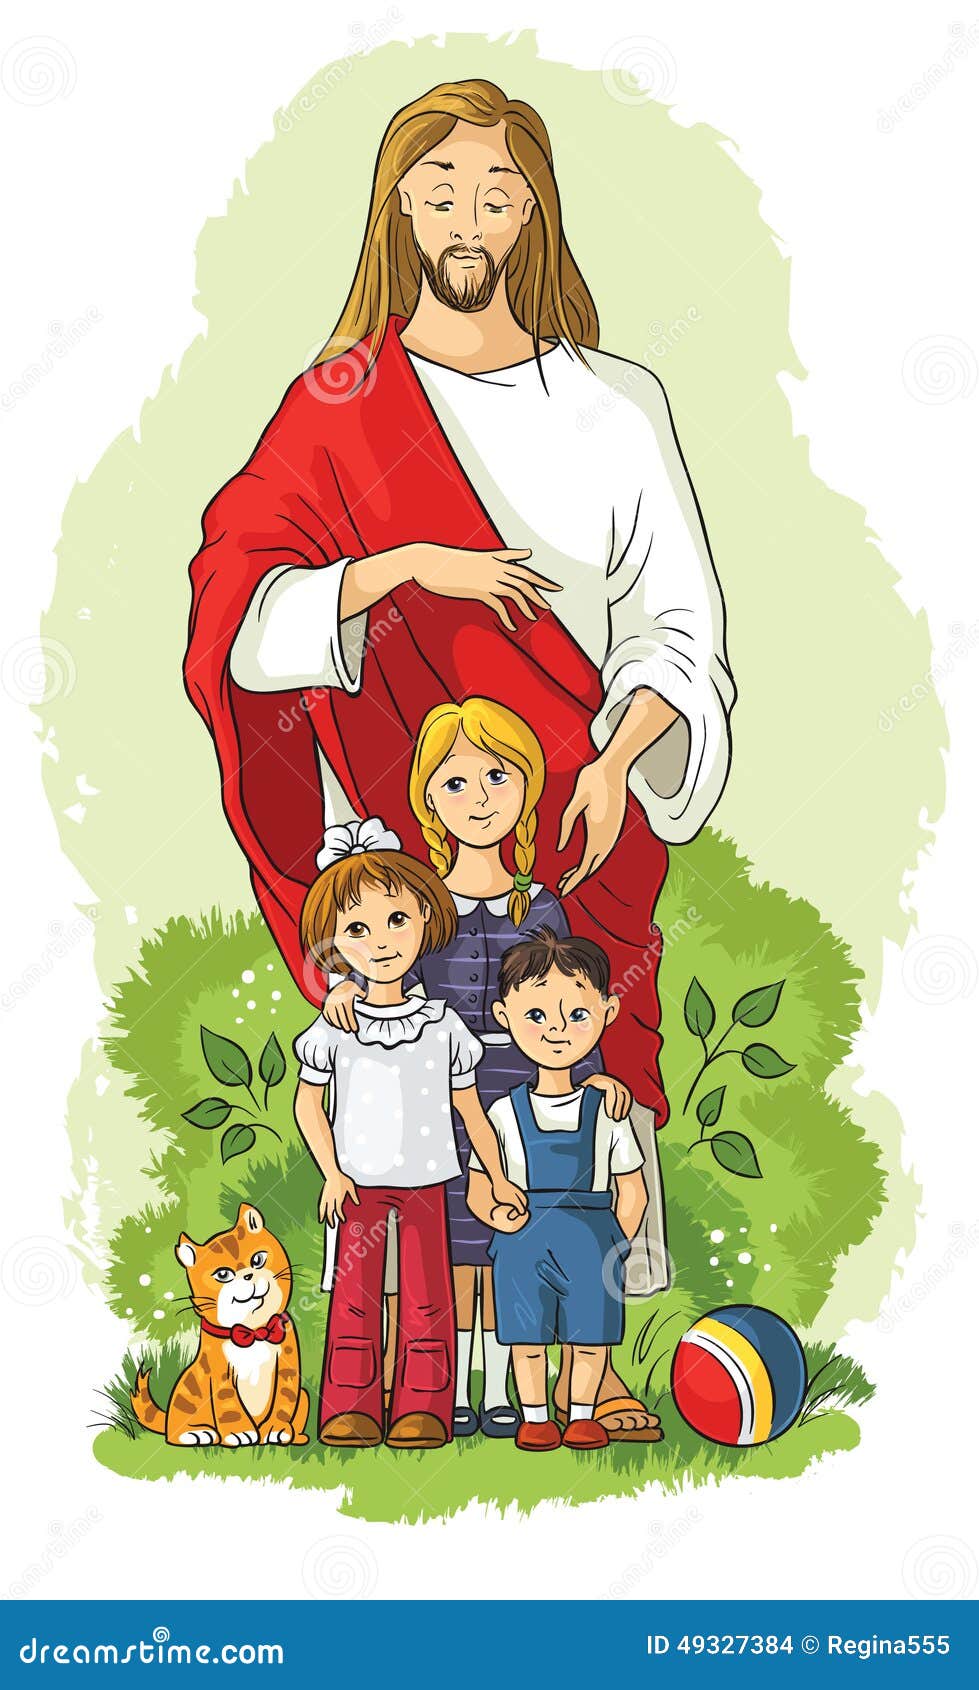 clipart jesus and child - photo #27